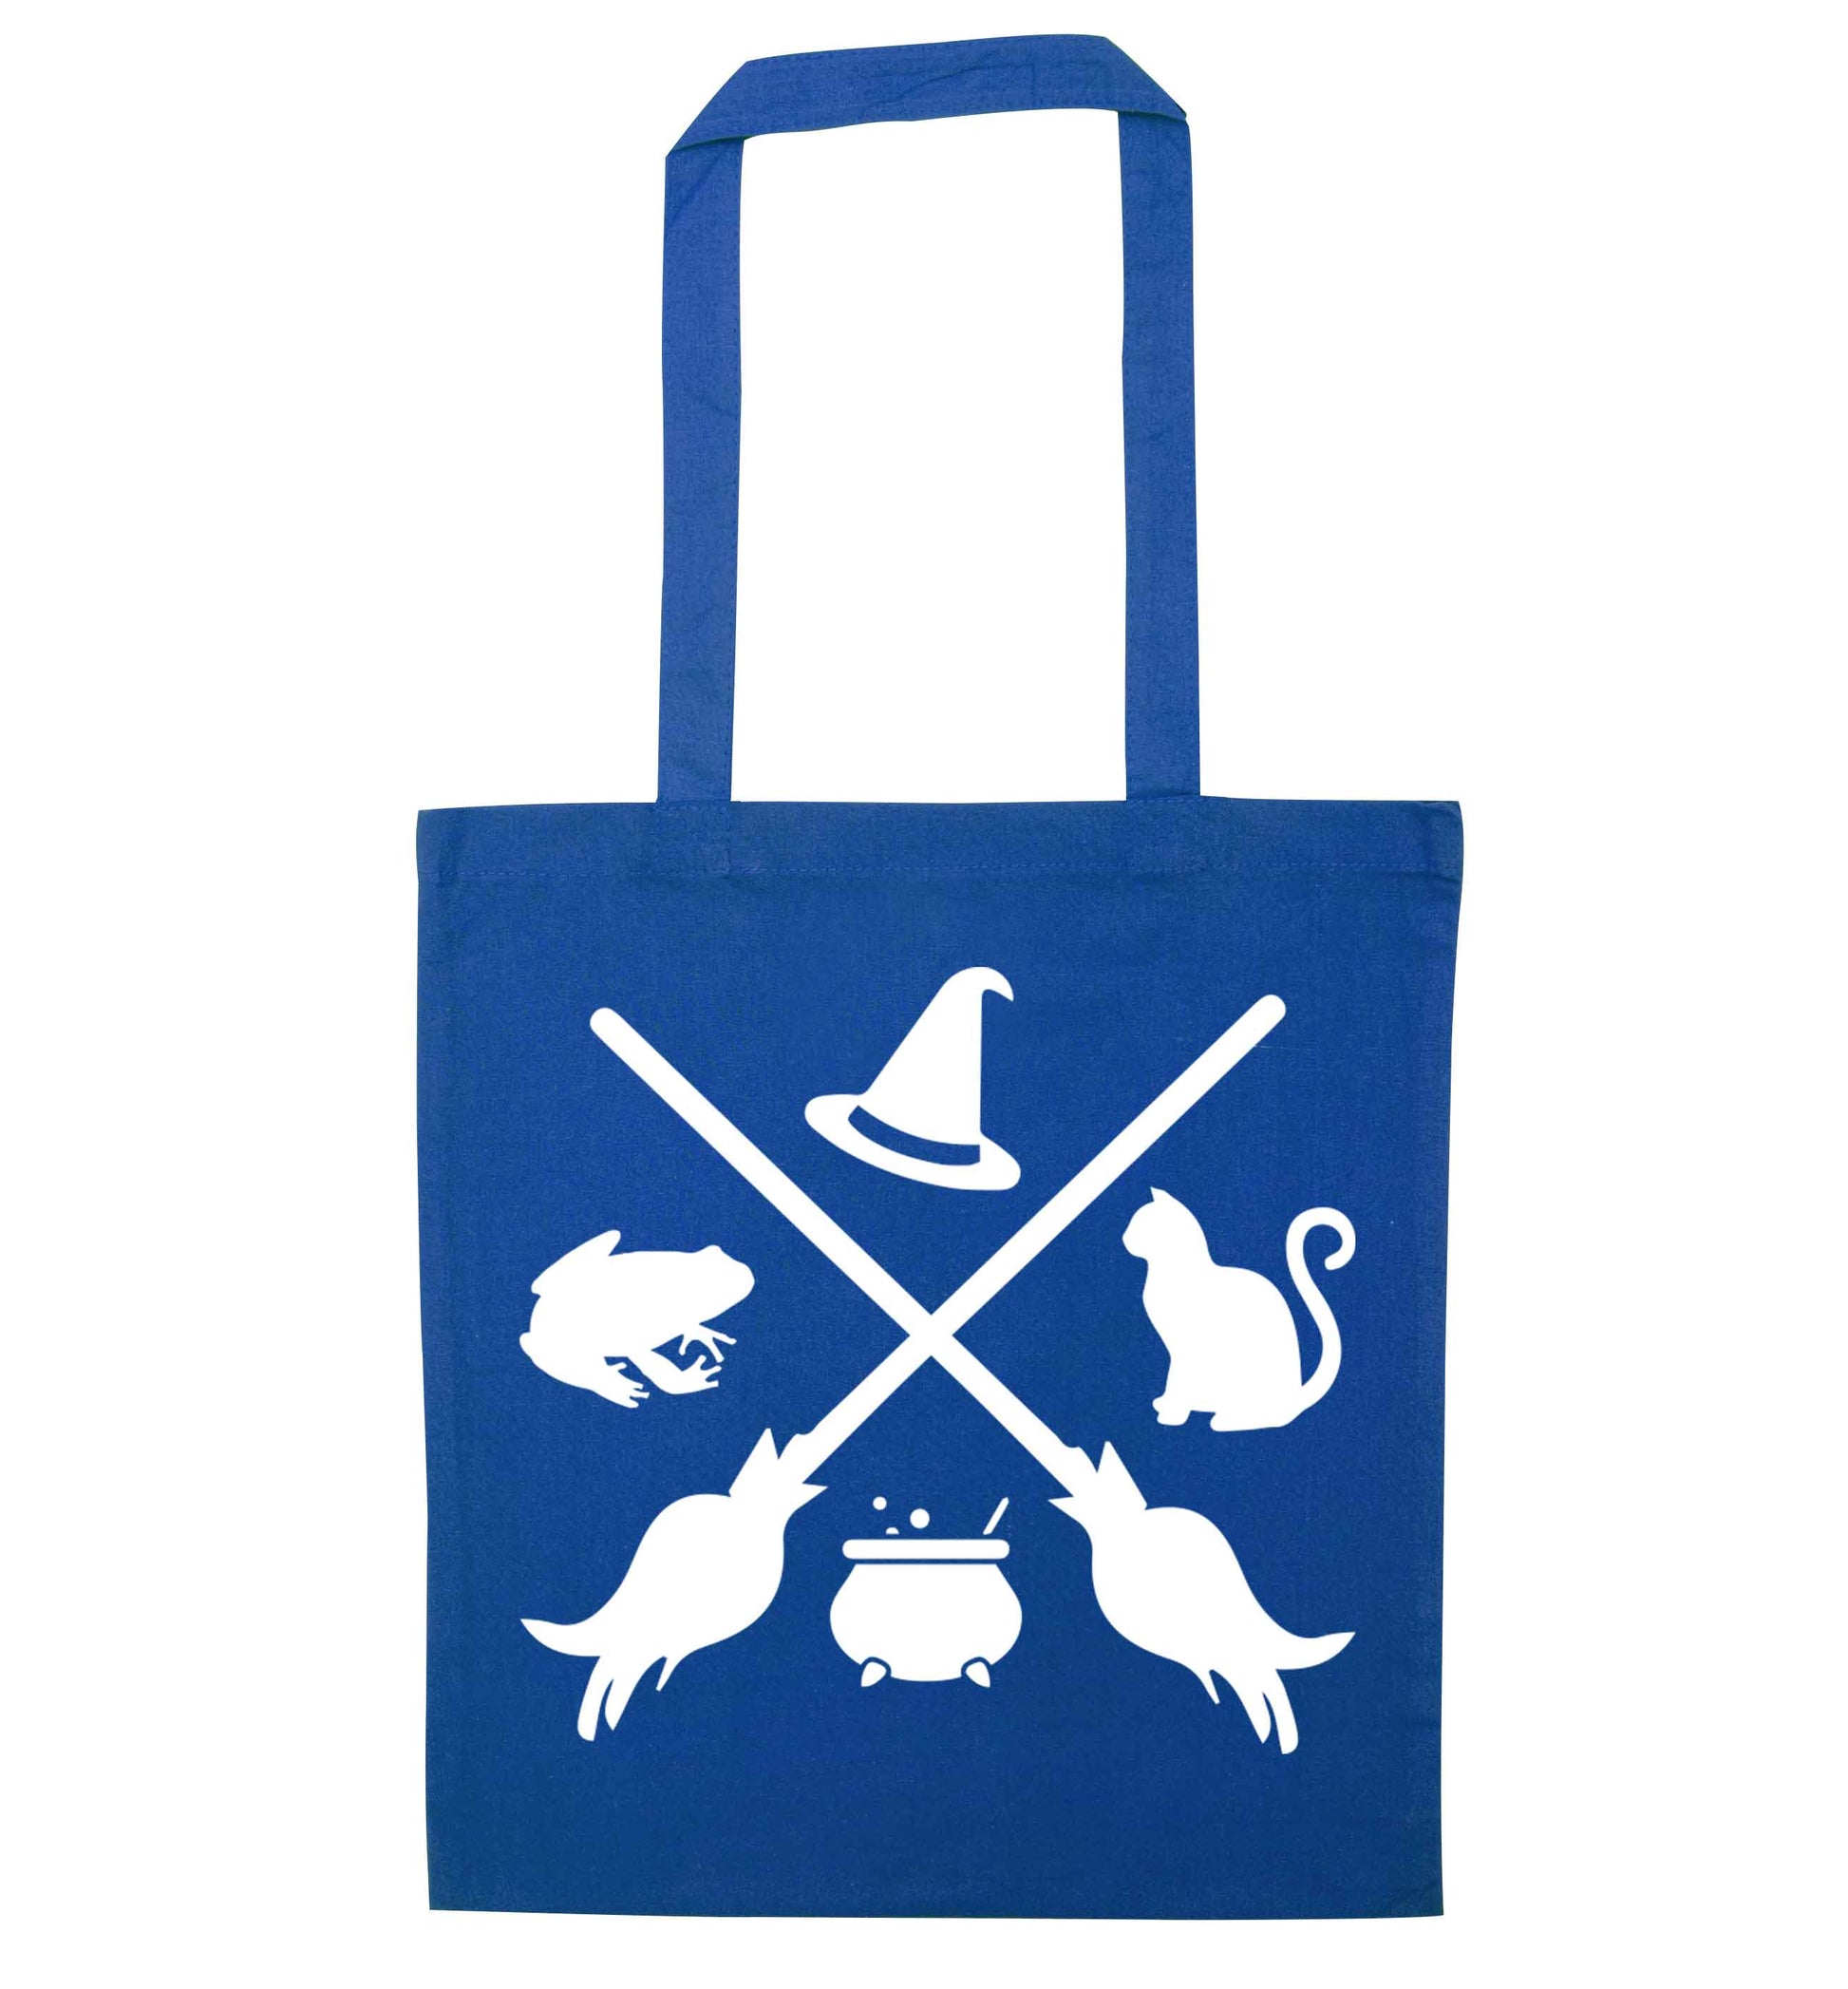 Witch symbol blue tote bag